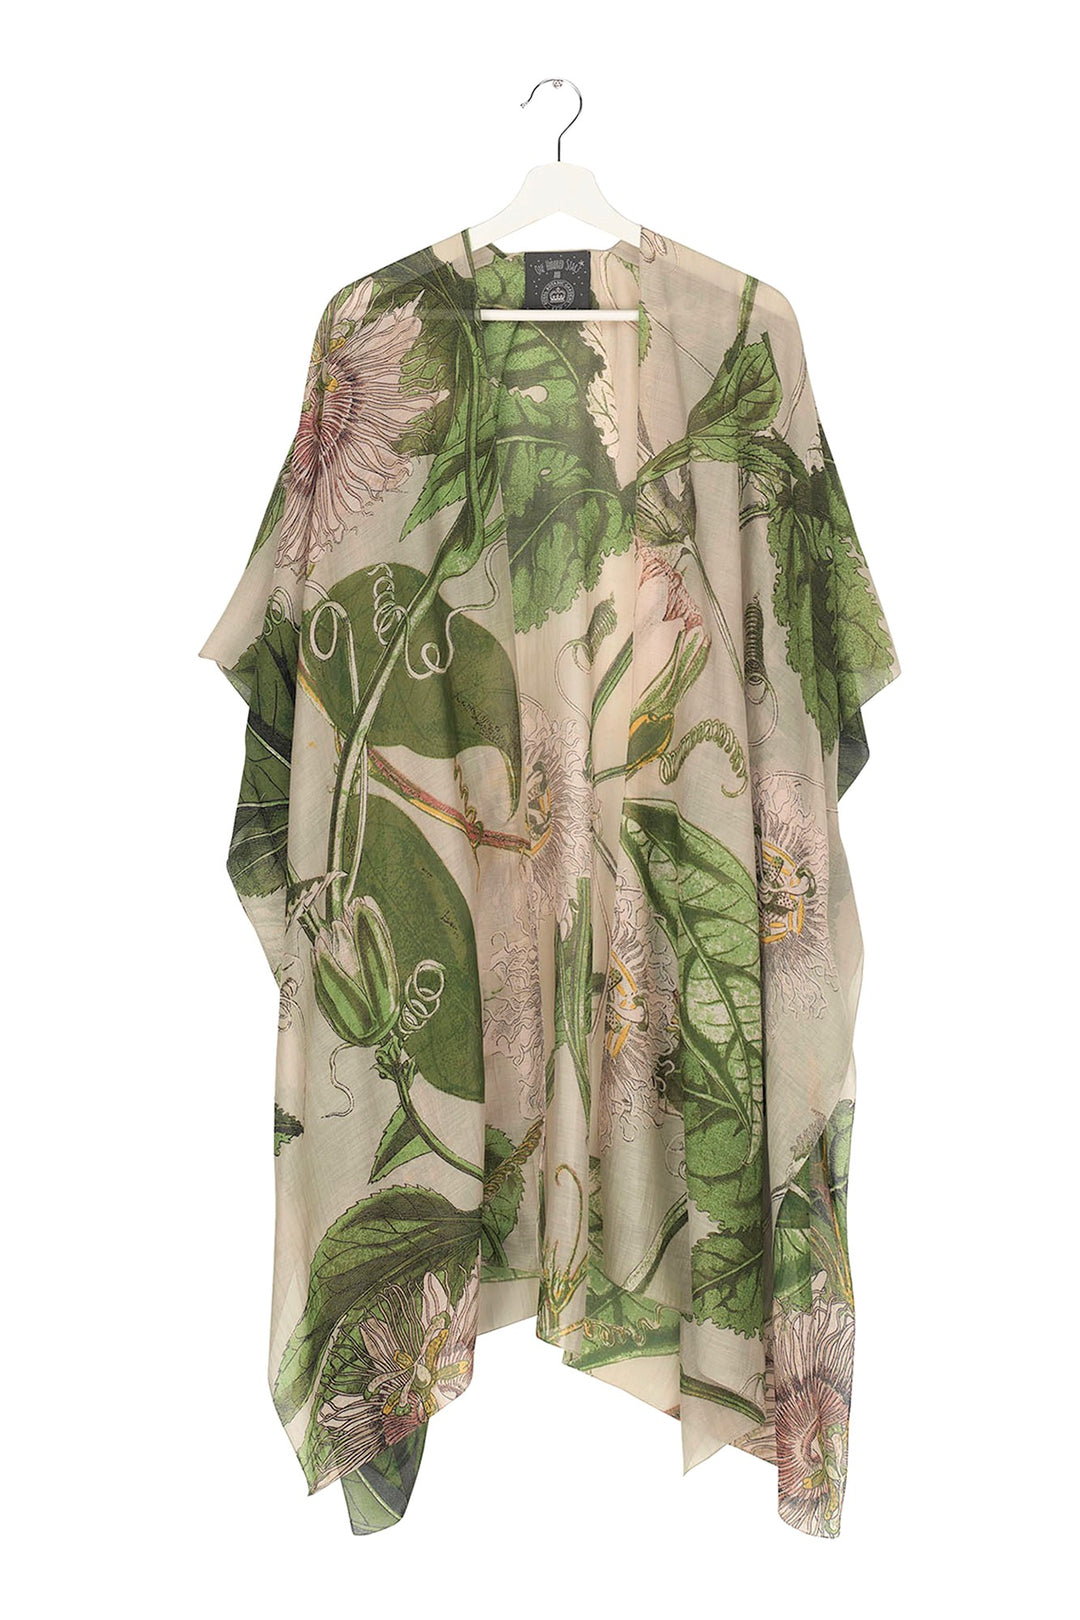 KEW Passion Flower Stone Throwover- These lightweight throwovers make the perfect cover up, they are mid-length with an open front and loose arms, perfect for the warmer months or worn on holiday as the ideal resort wear. 